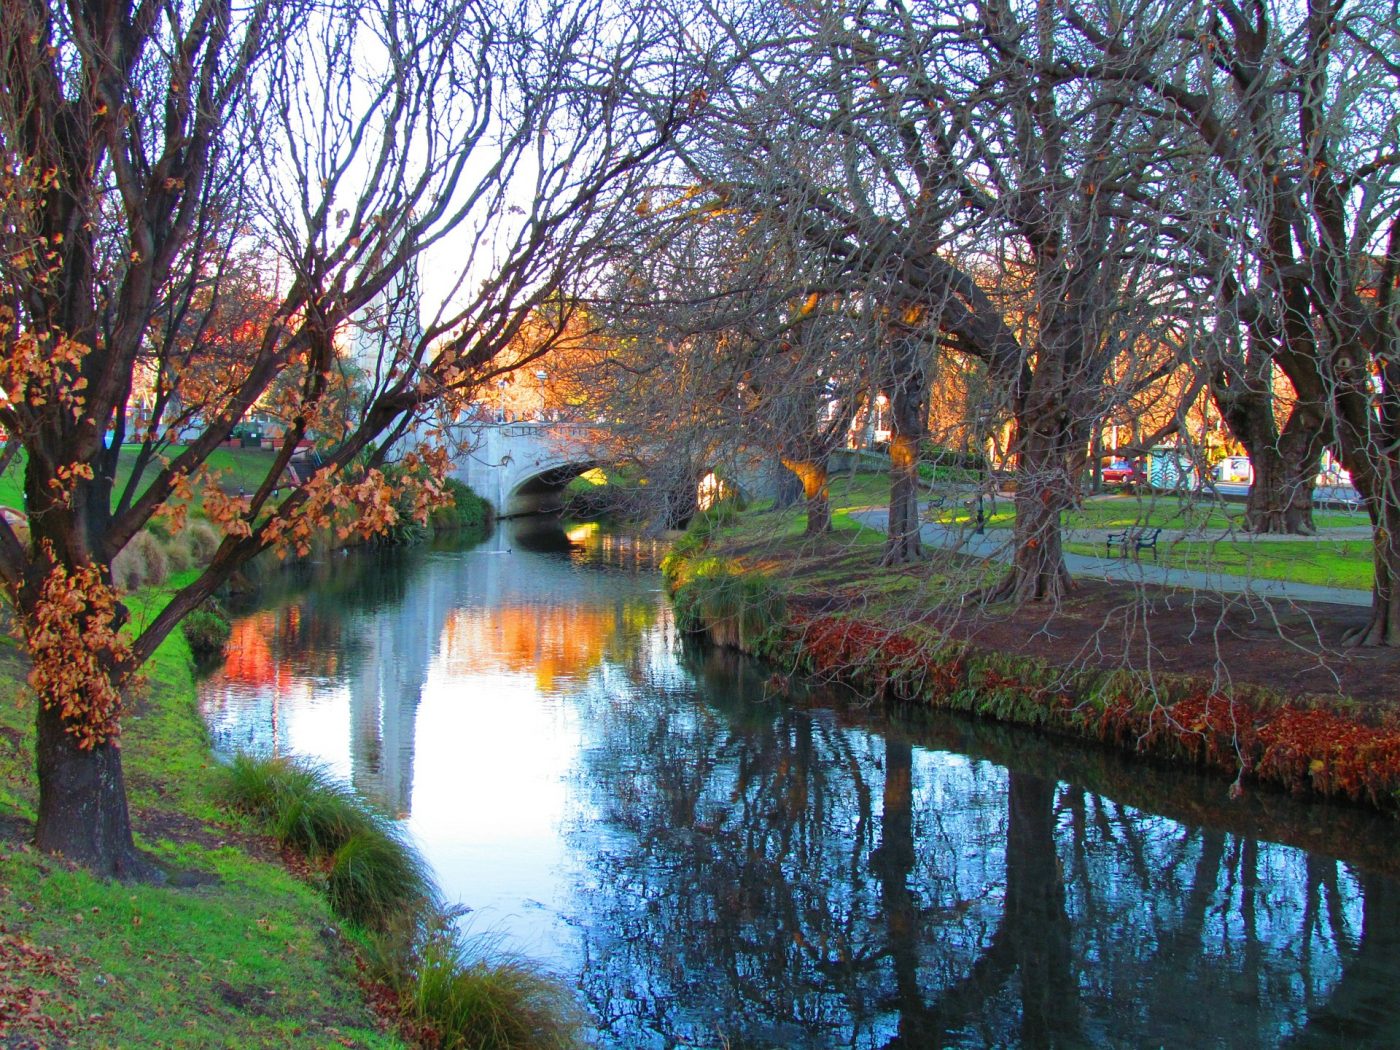 Things to do in Christchurch New Zealand, go see the Botanic Garden